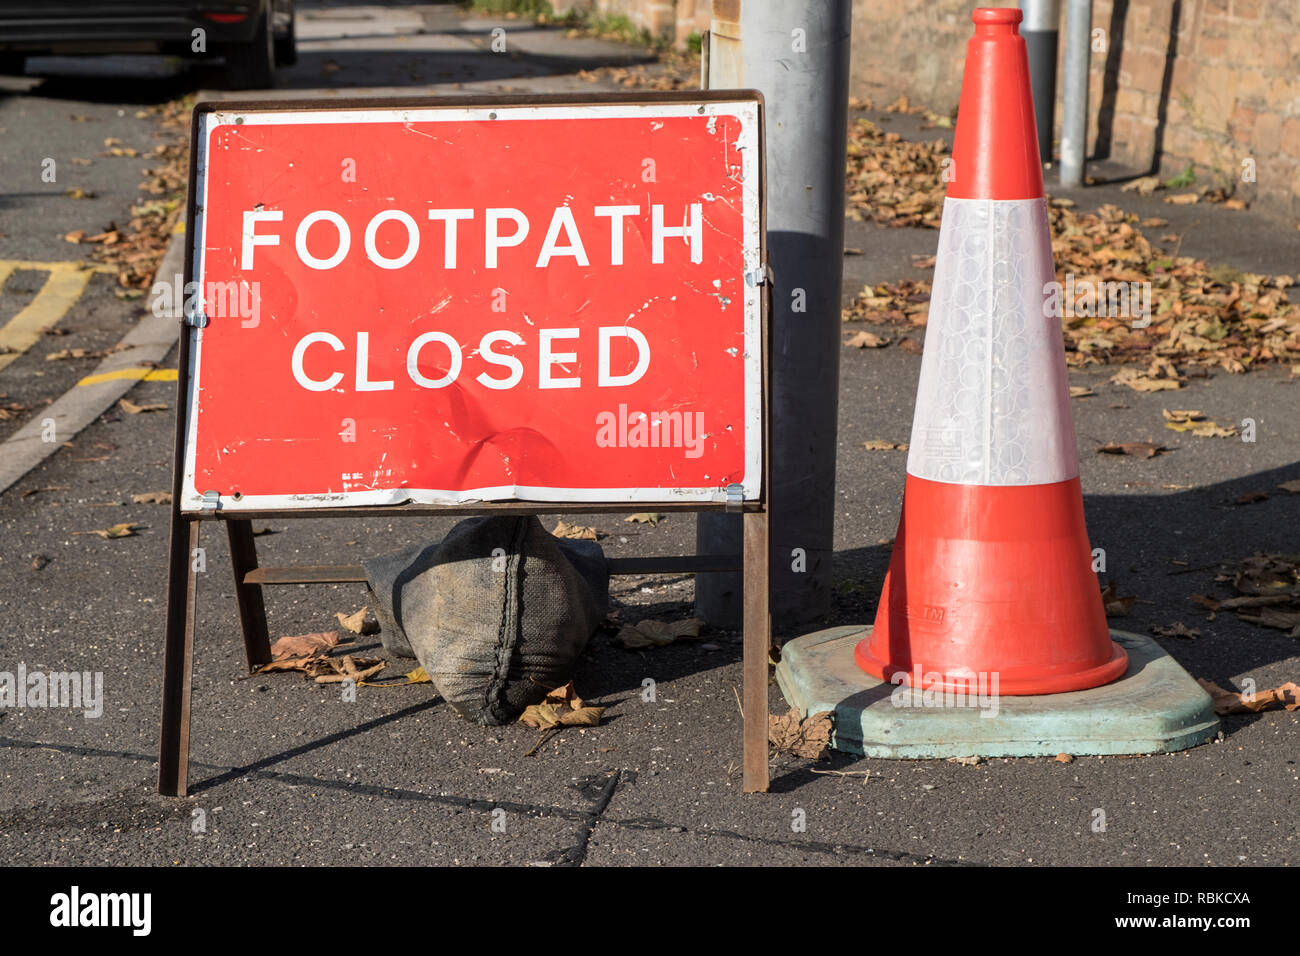 Footpath Closed sign on a pavement, Nottingham, England, UK Stock Photo